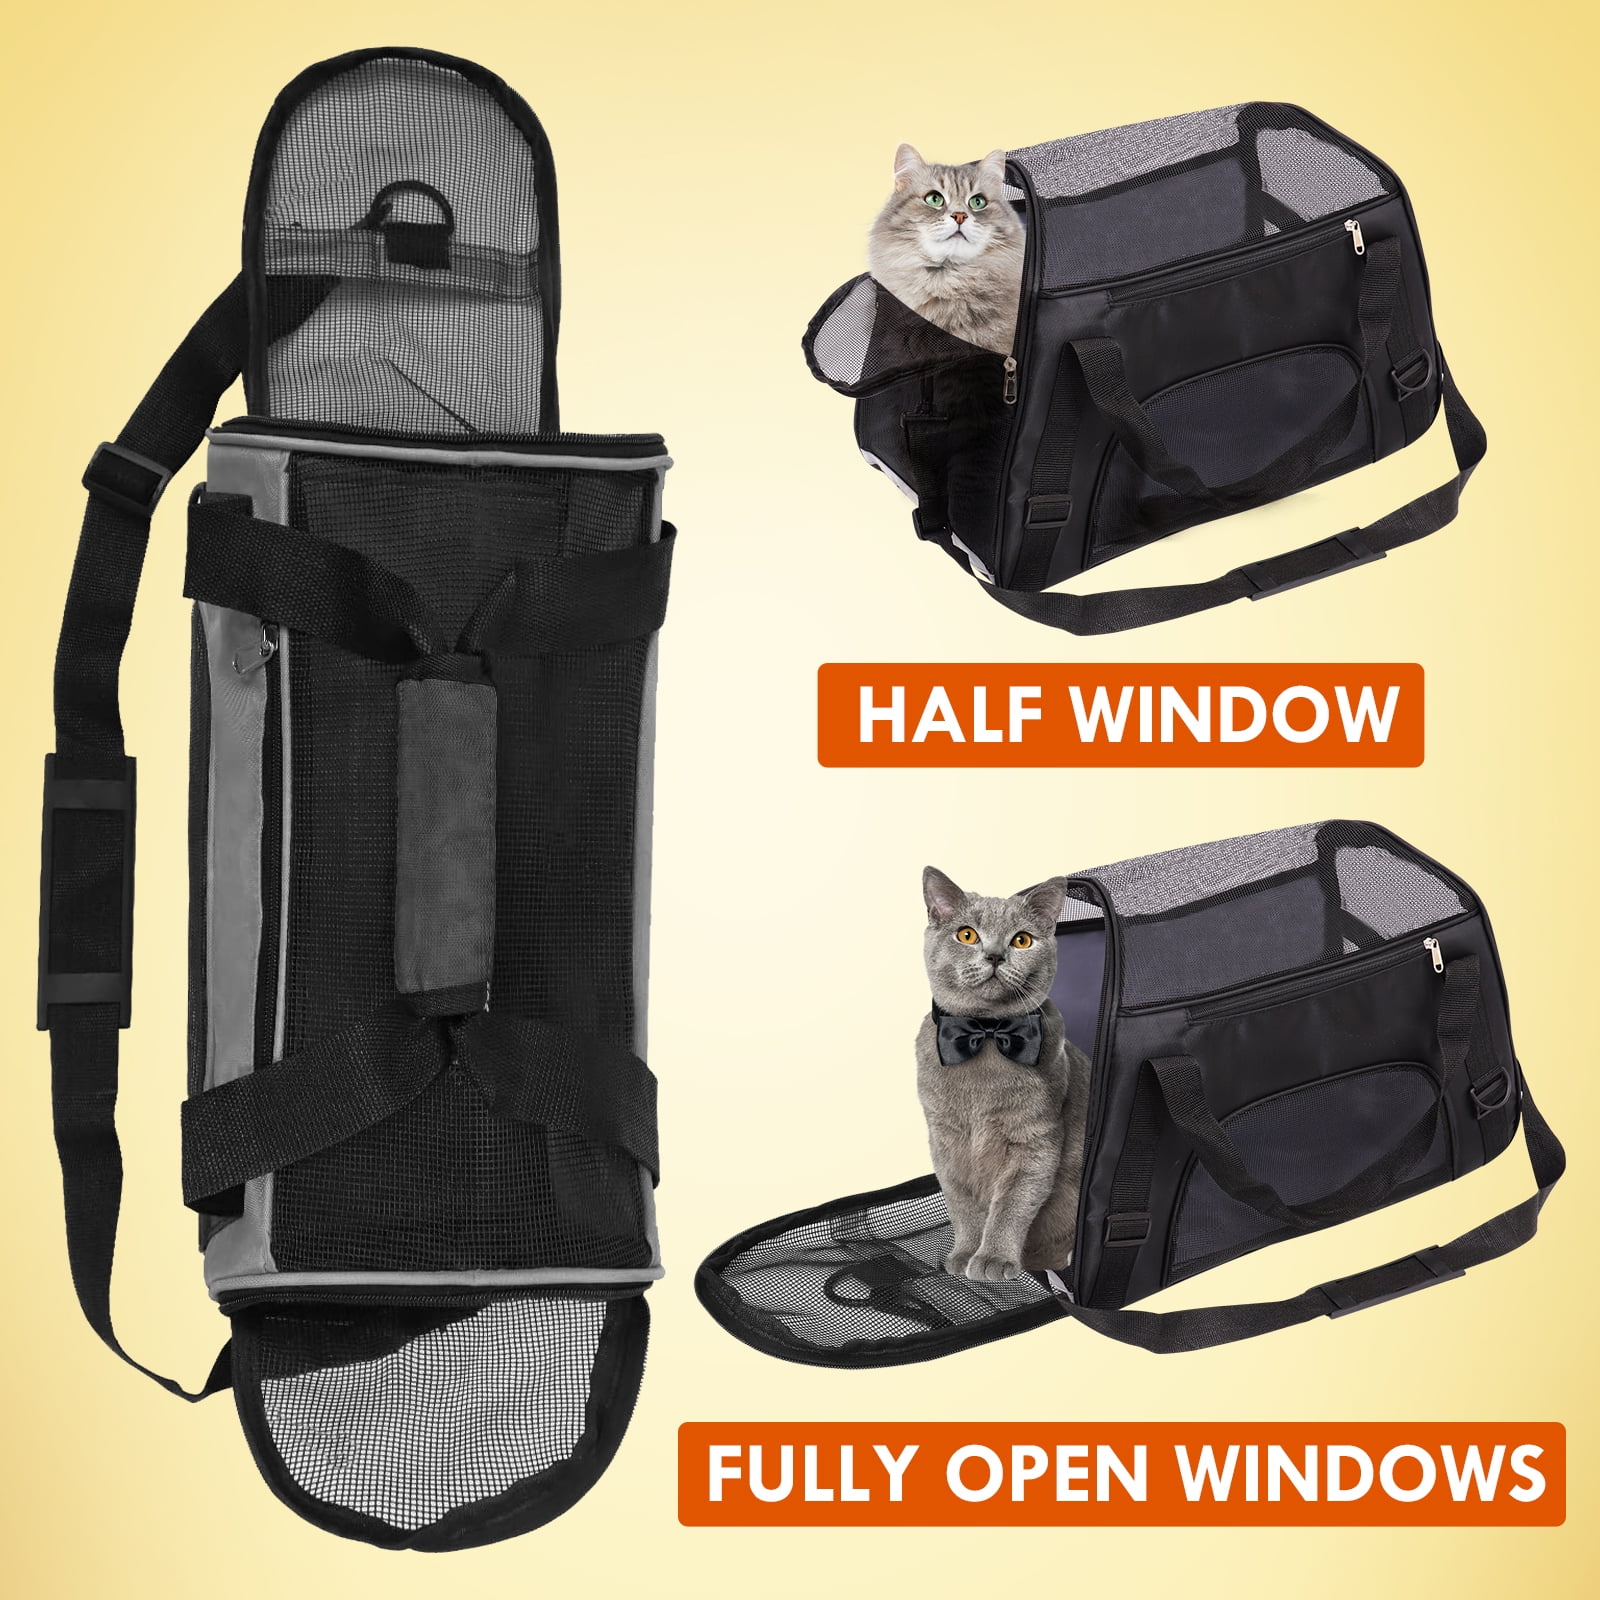  EXPAWLORER Cat Carrier Large, Soft-Sided Pet Carrier for Cat,Top  Load Cat Travel Carriers for Medium Cats Under 25, Airline Approved Pet Bag  Carriers Fit 2 Kitties Small Dogs : Pet